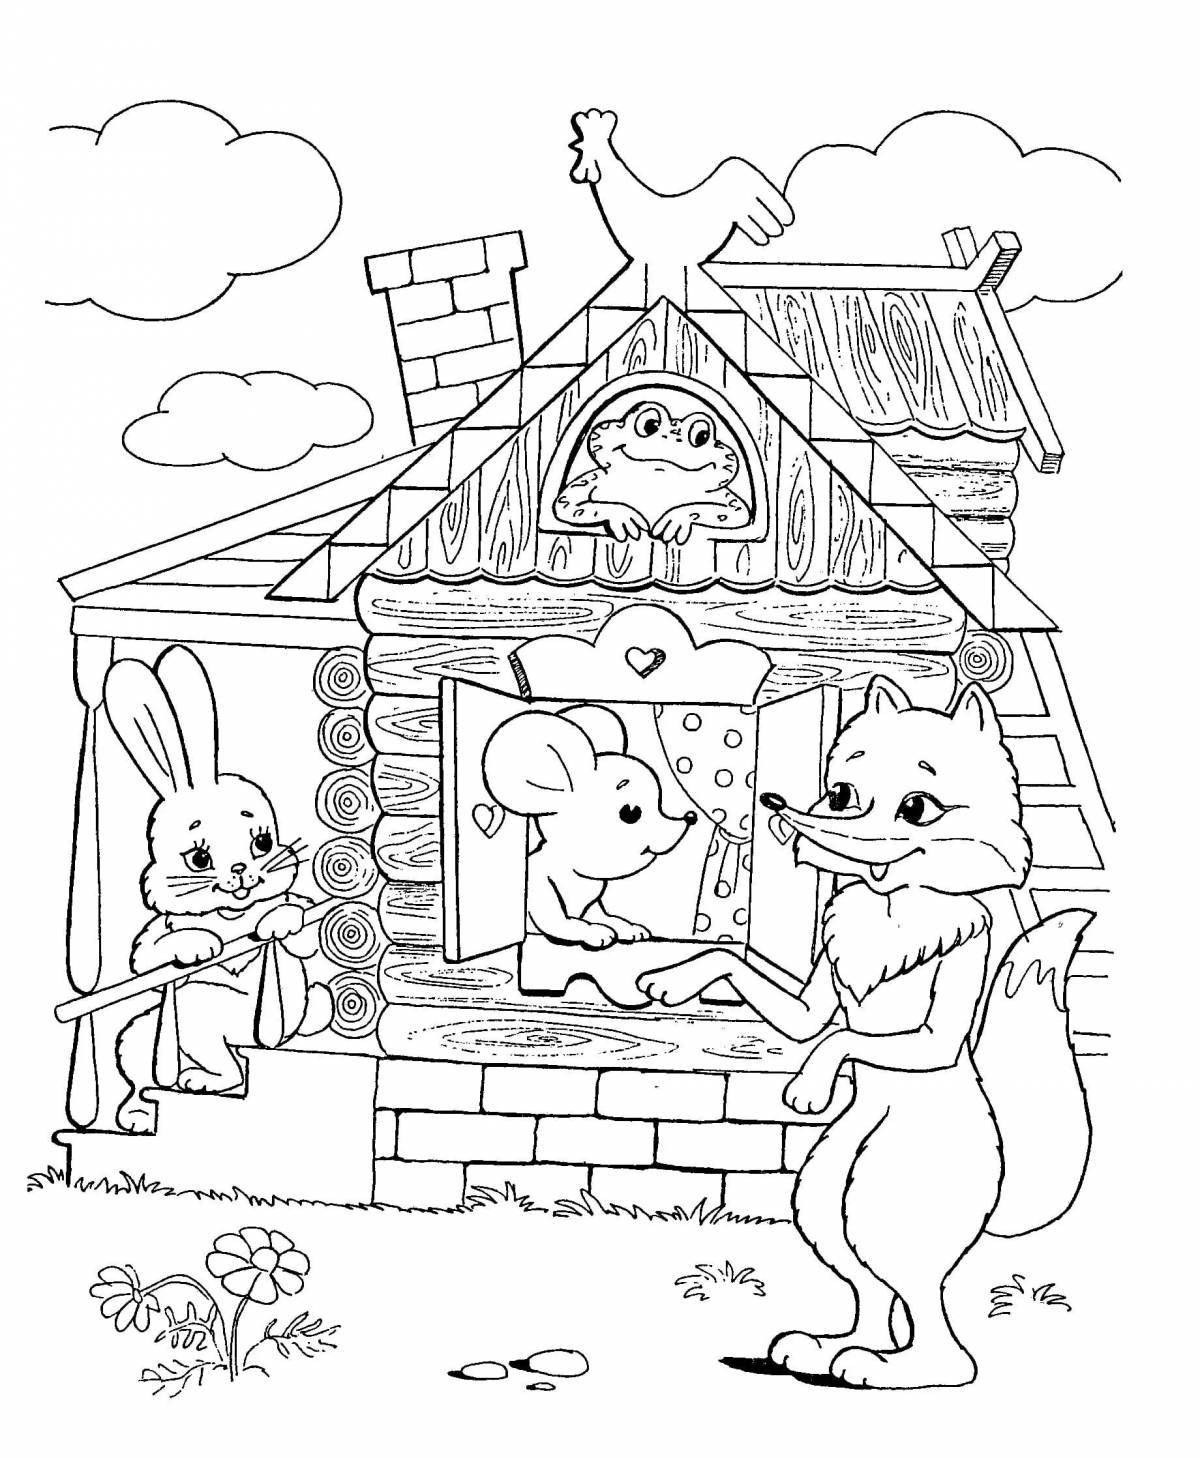 Perfect cat house coloring book for preschoolers